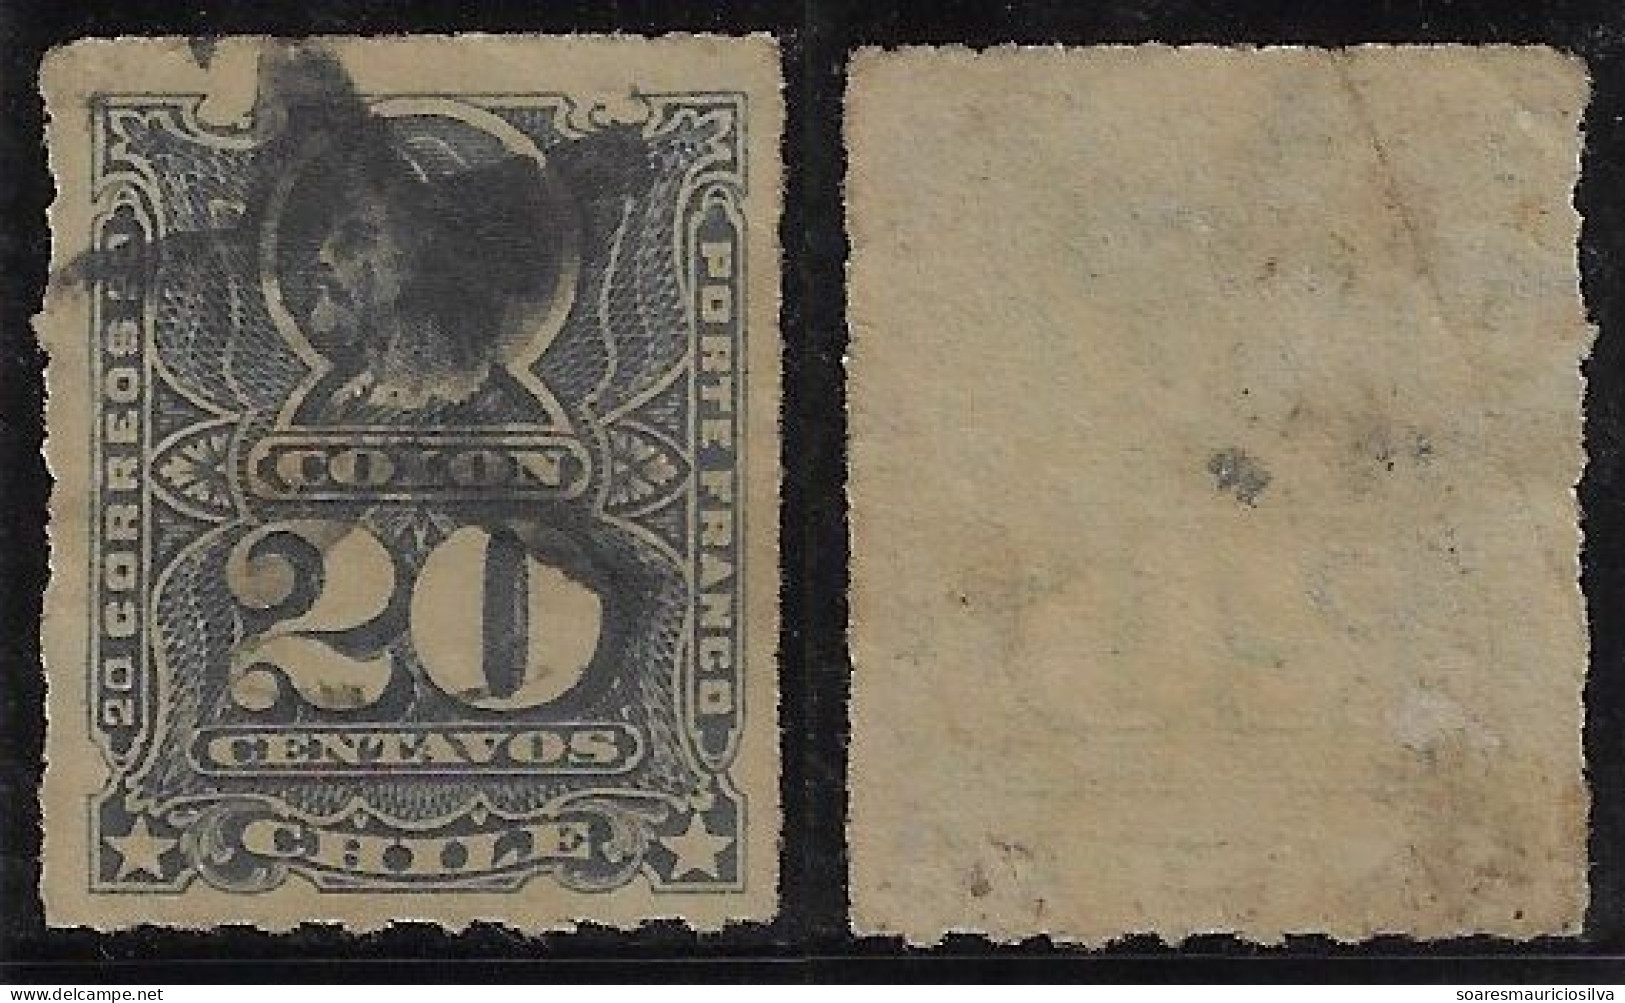 Chile 1886 Stamp Christopher Columbus 20 Cents Fancy Cancel Mute Postmark Star - Chile